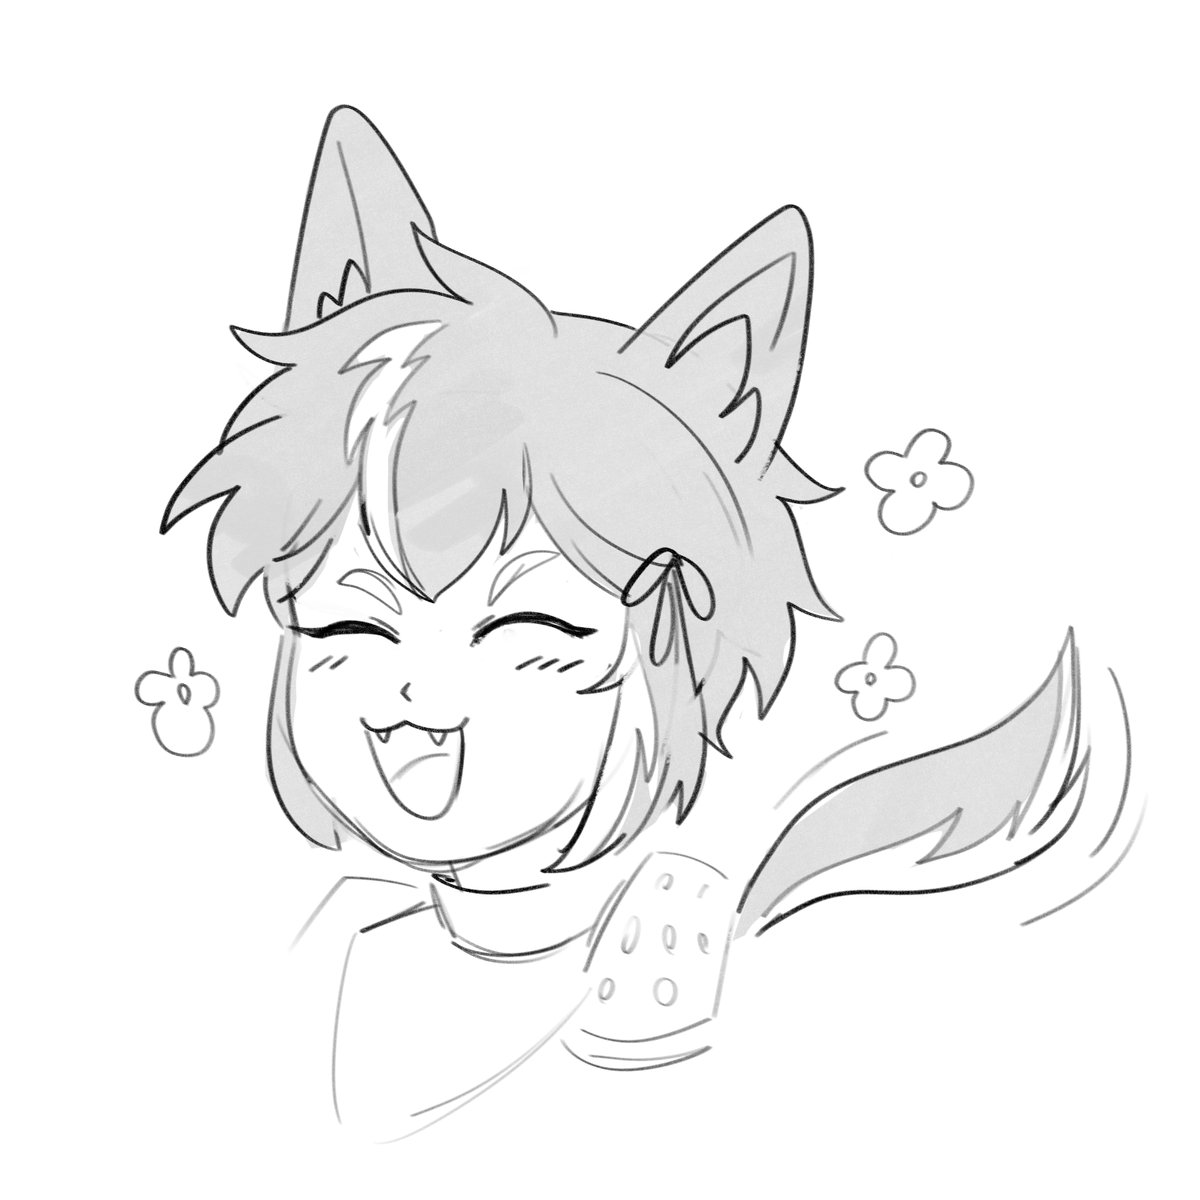 a happy gorou for @ivanxaxaxaxa on kofi!! 

sorry for the delay, been super busy with uni 👁️ 